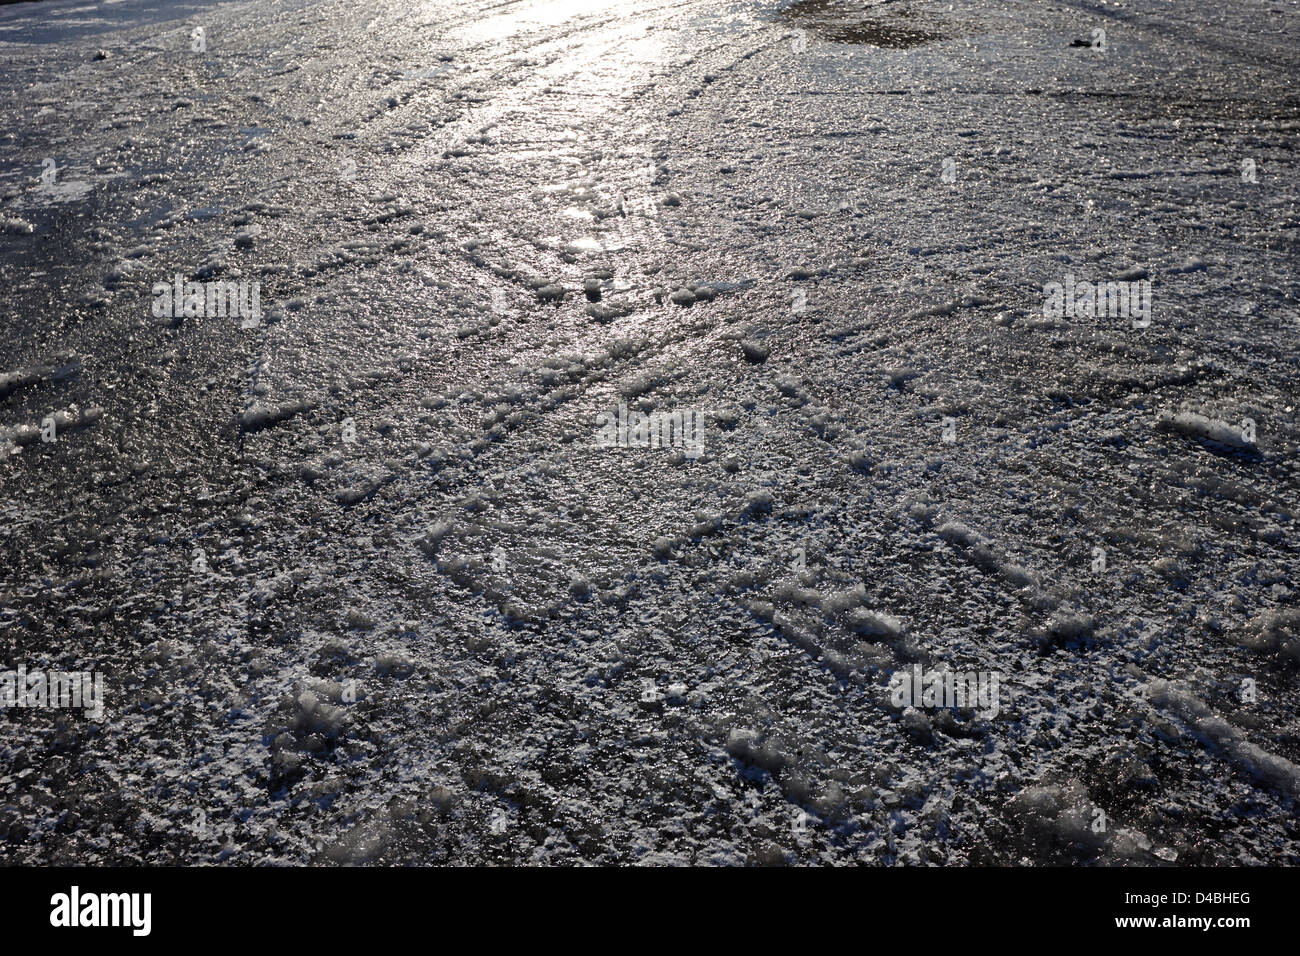 road frozen covered in thick ice Tromso troms Norway europe Stock Photo